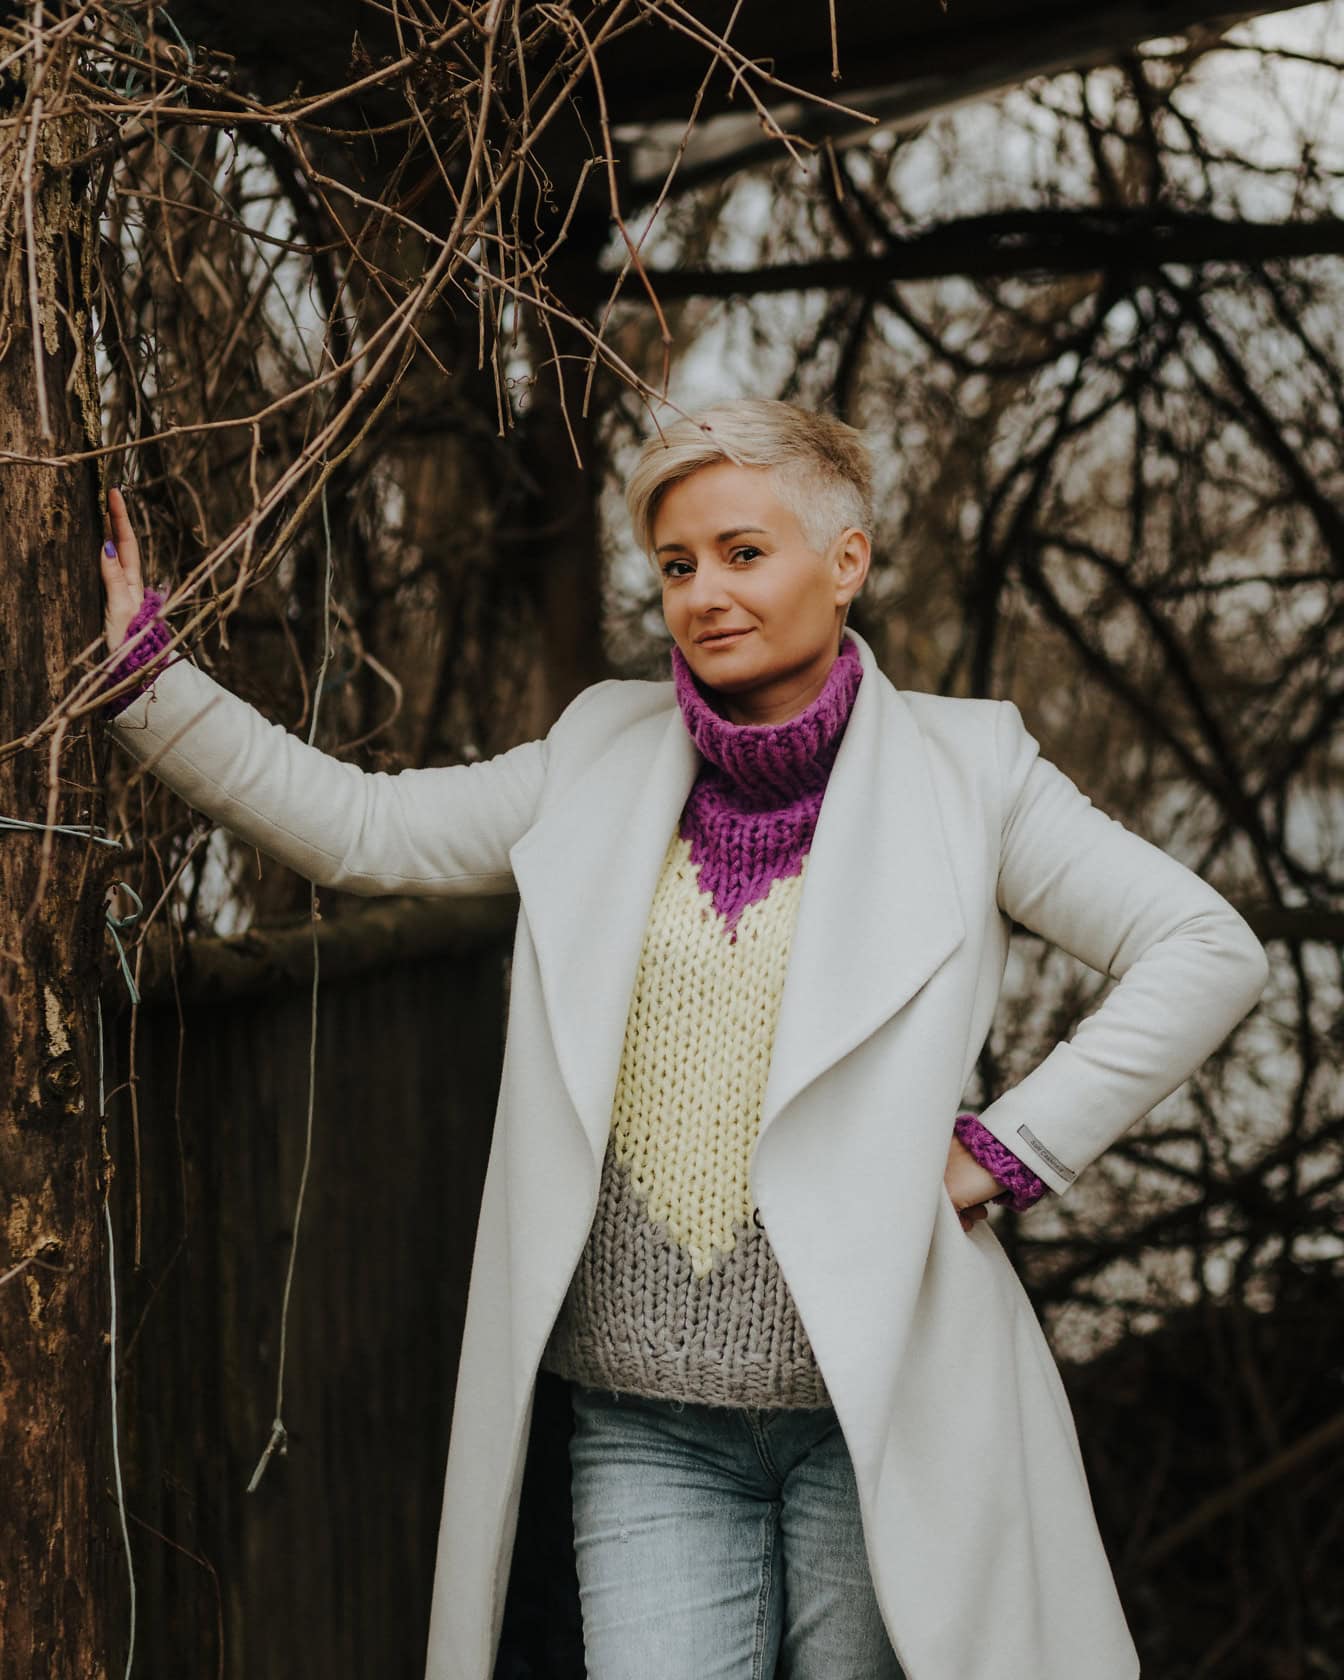 Pretty woman with short hairstyle in a white coat and purple handmade sweater posing leaning on a tree